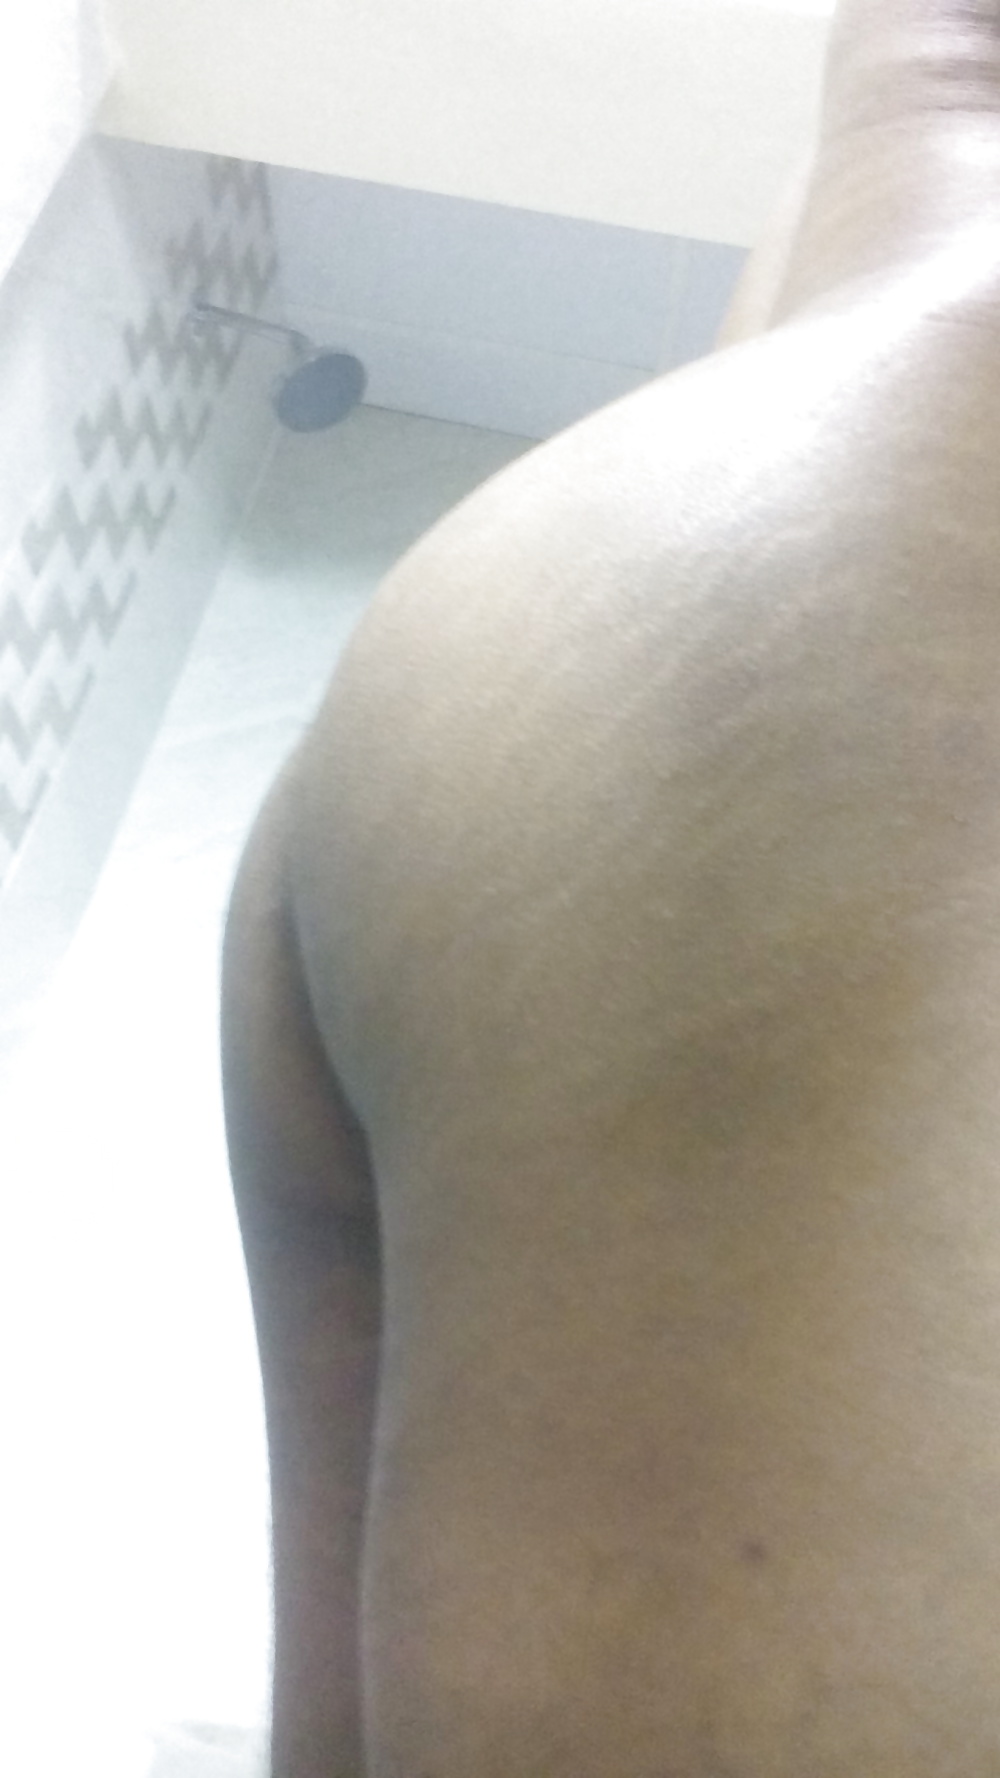 My ass and asspussy spread open for all.. #30978405